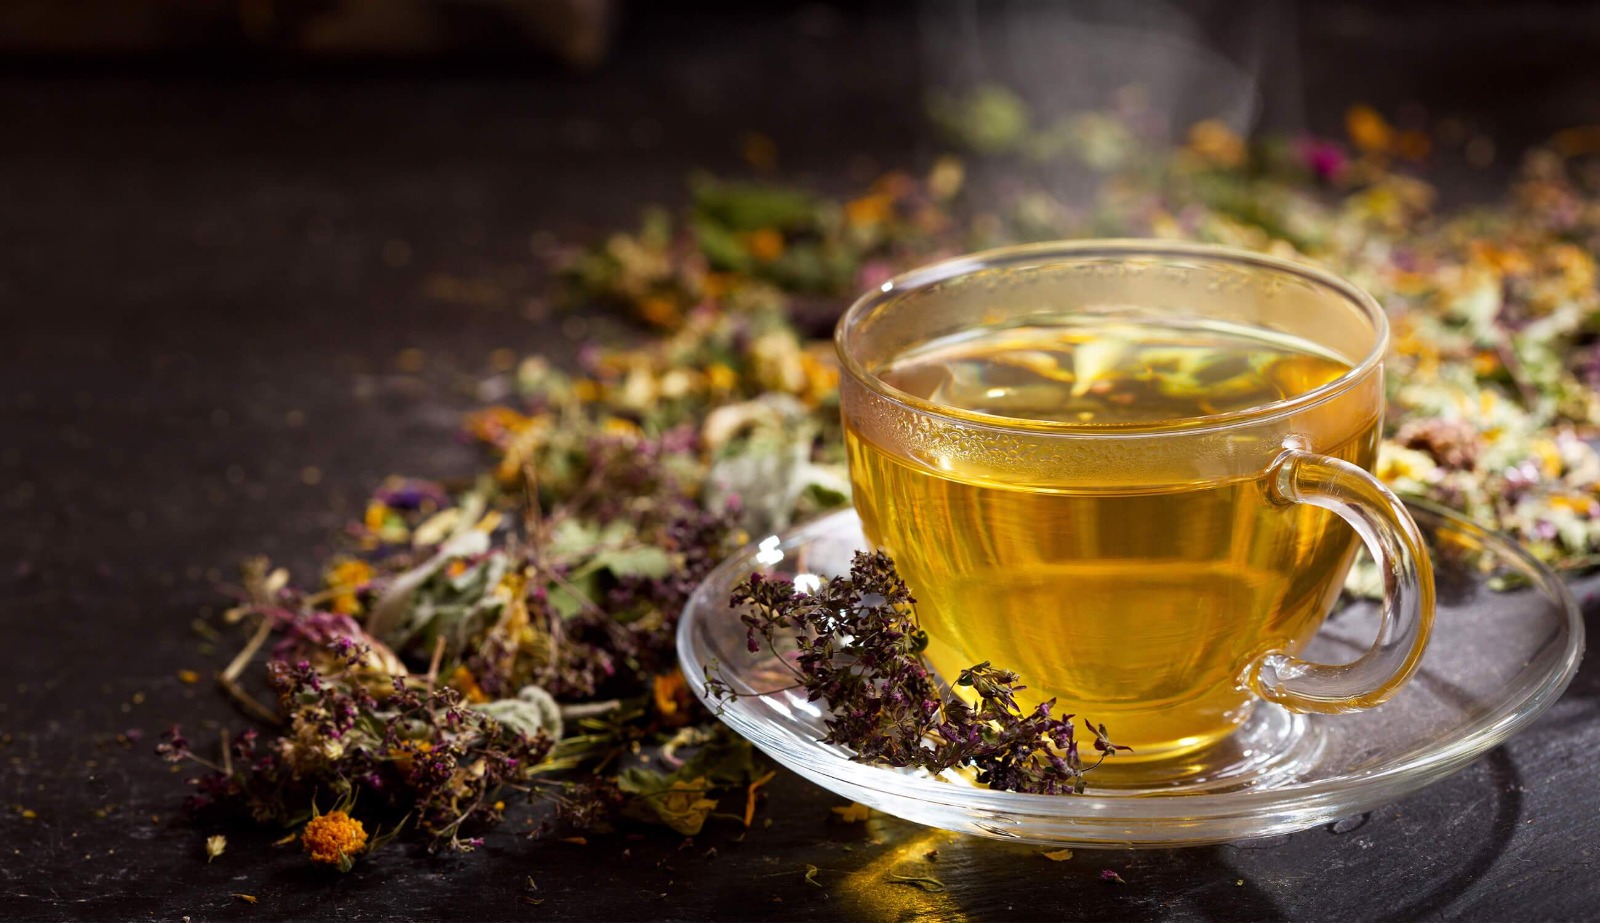 Turkish Herbal Teas and their Benefits